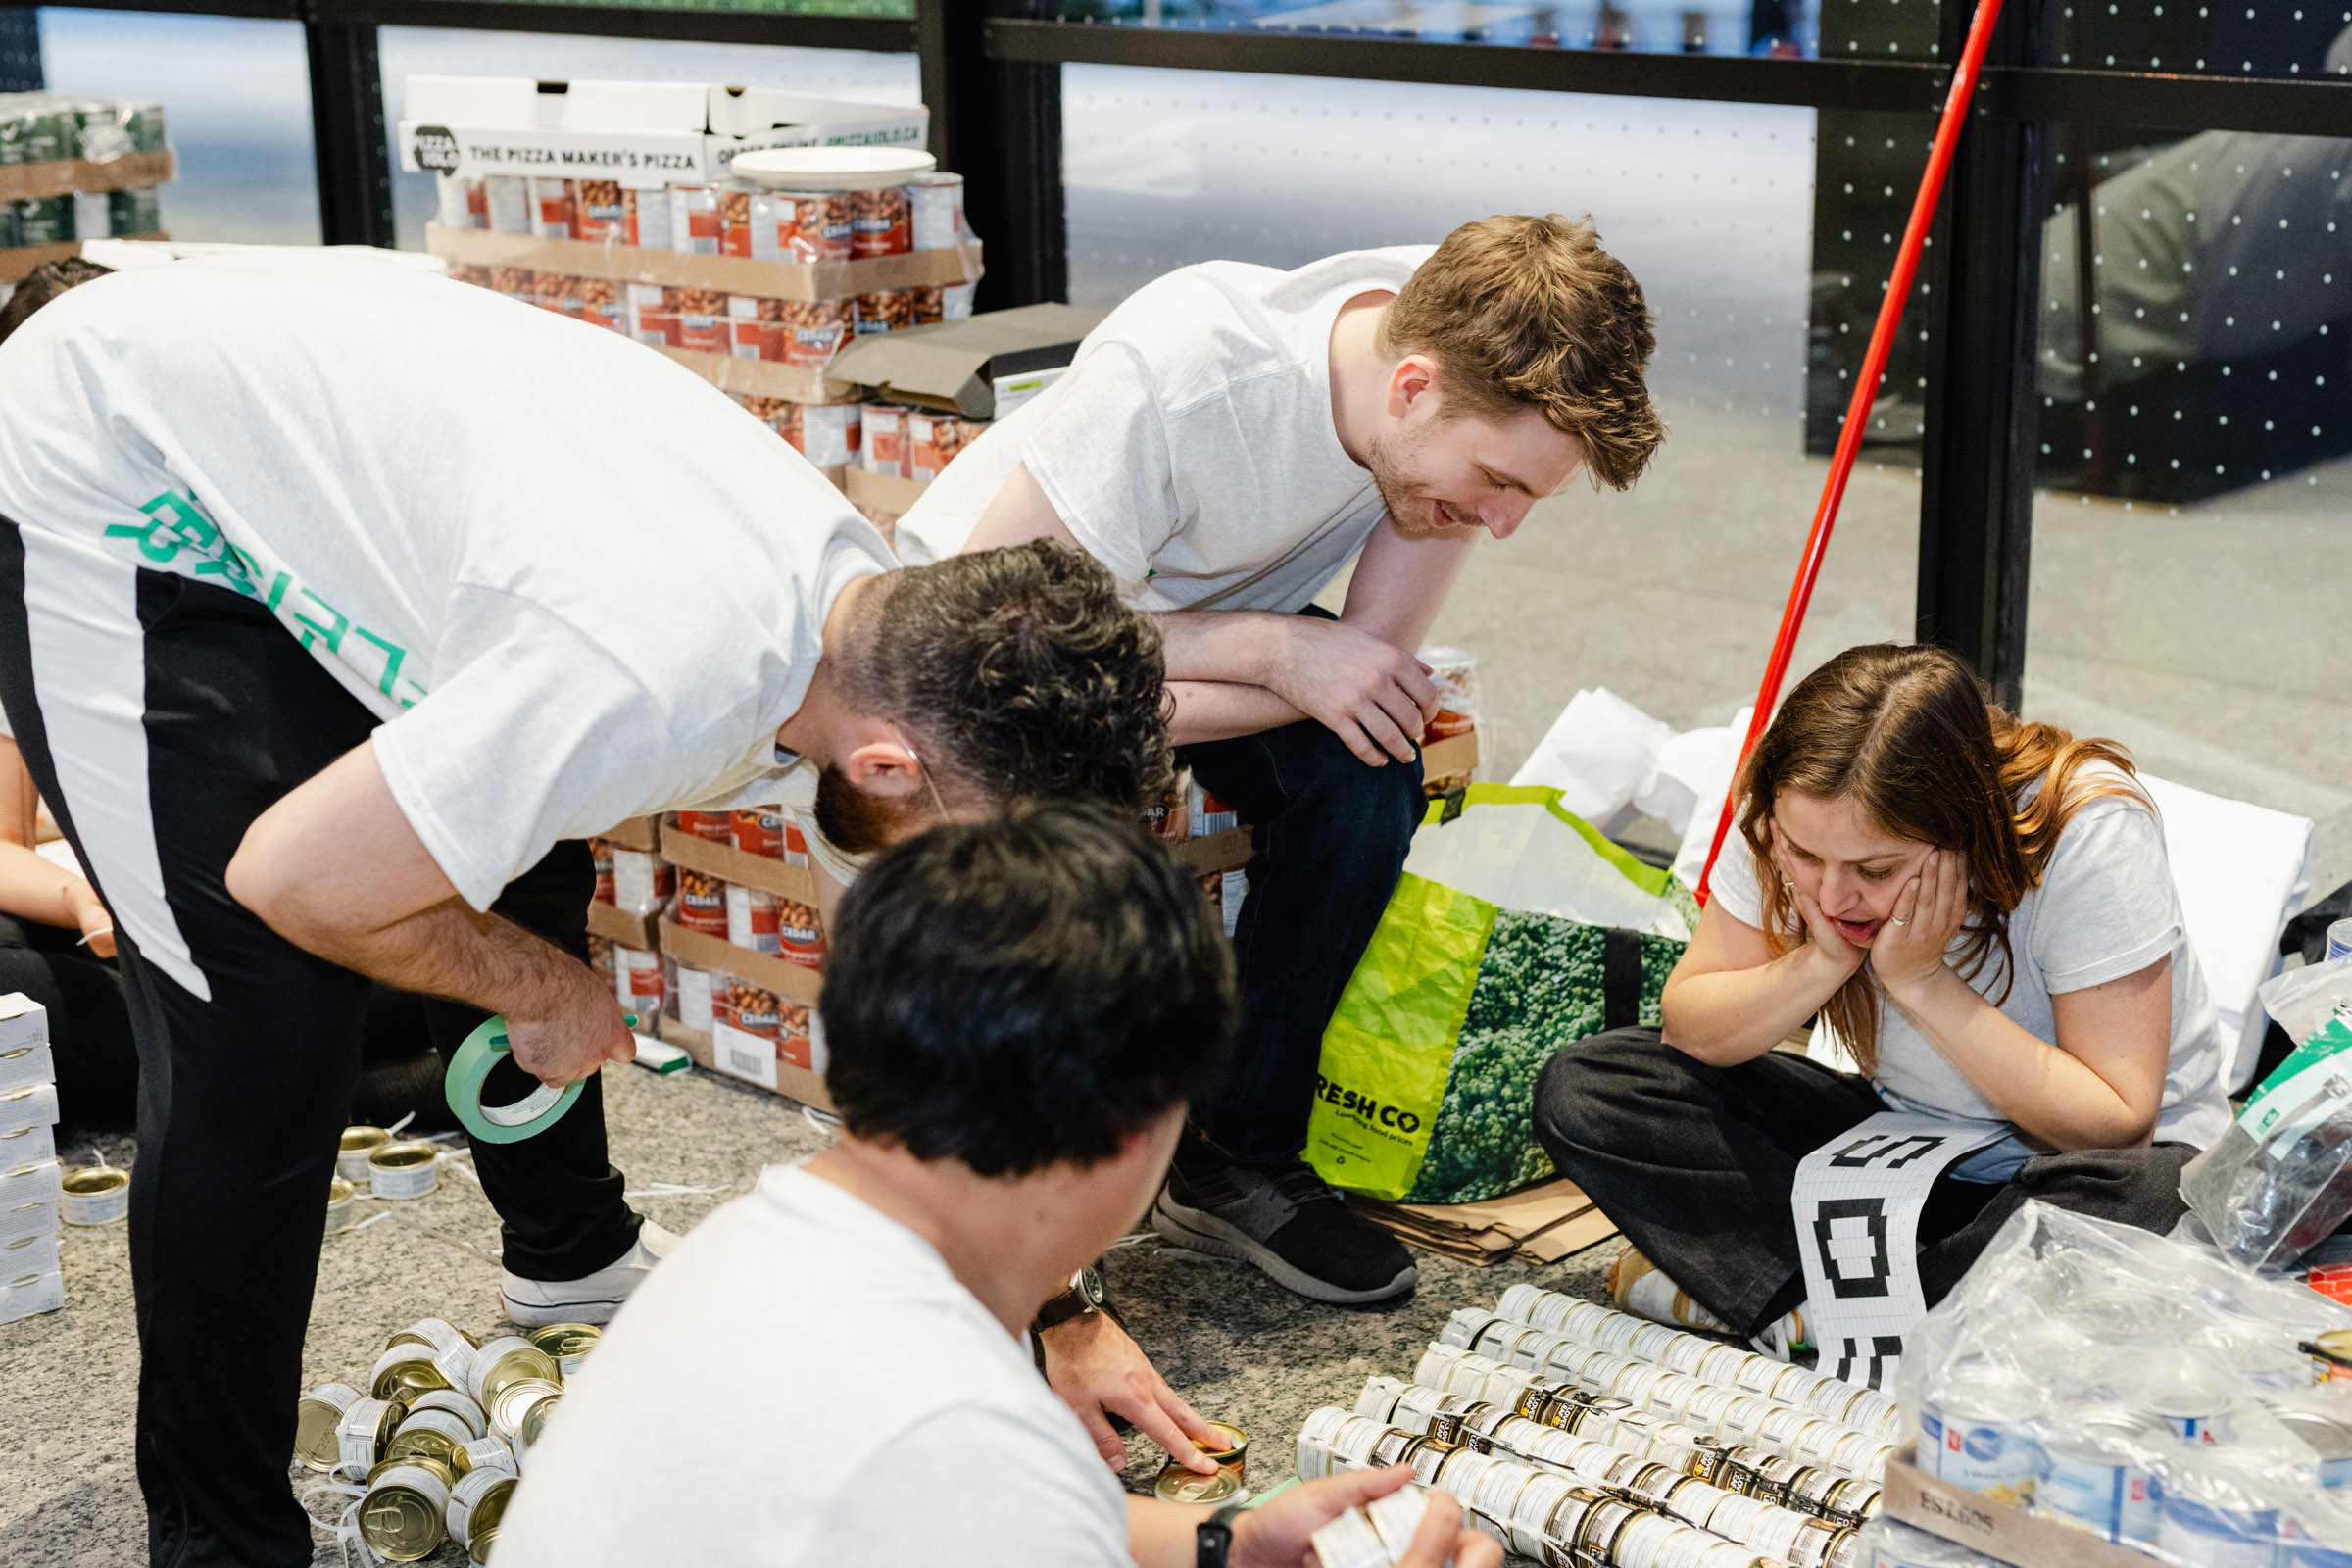 A group of four people sorts and organizes canned food items and boxes in a room. Some are kneeling and some are crouching, engaged in their task, creating a candid scene perfect for event photography.